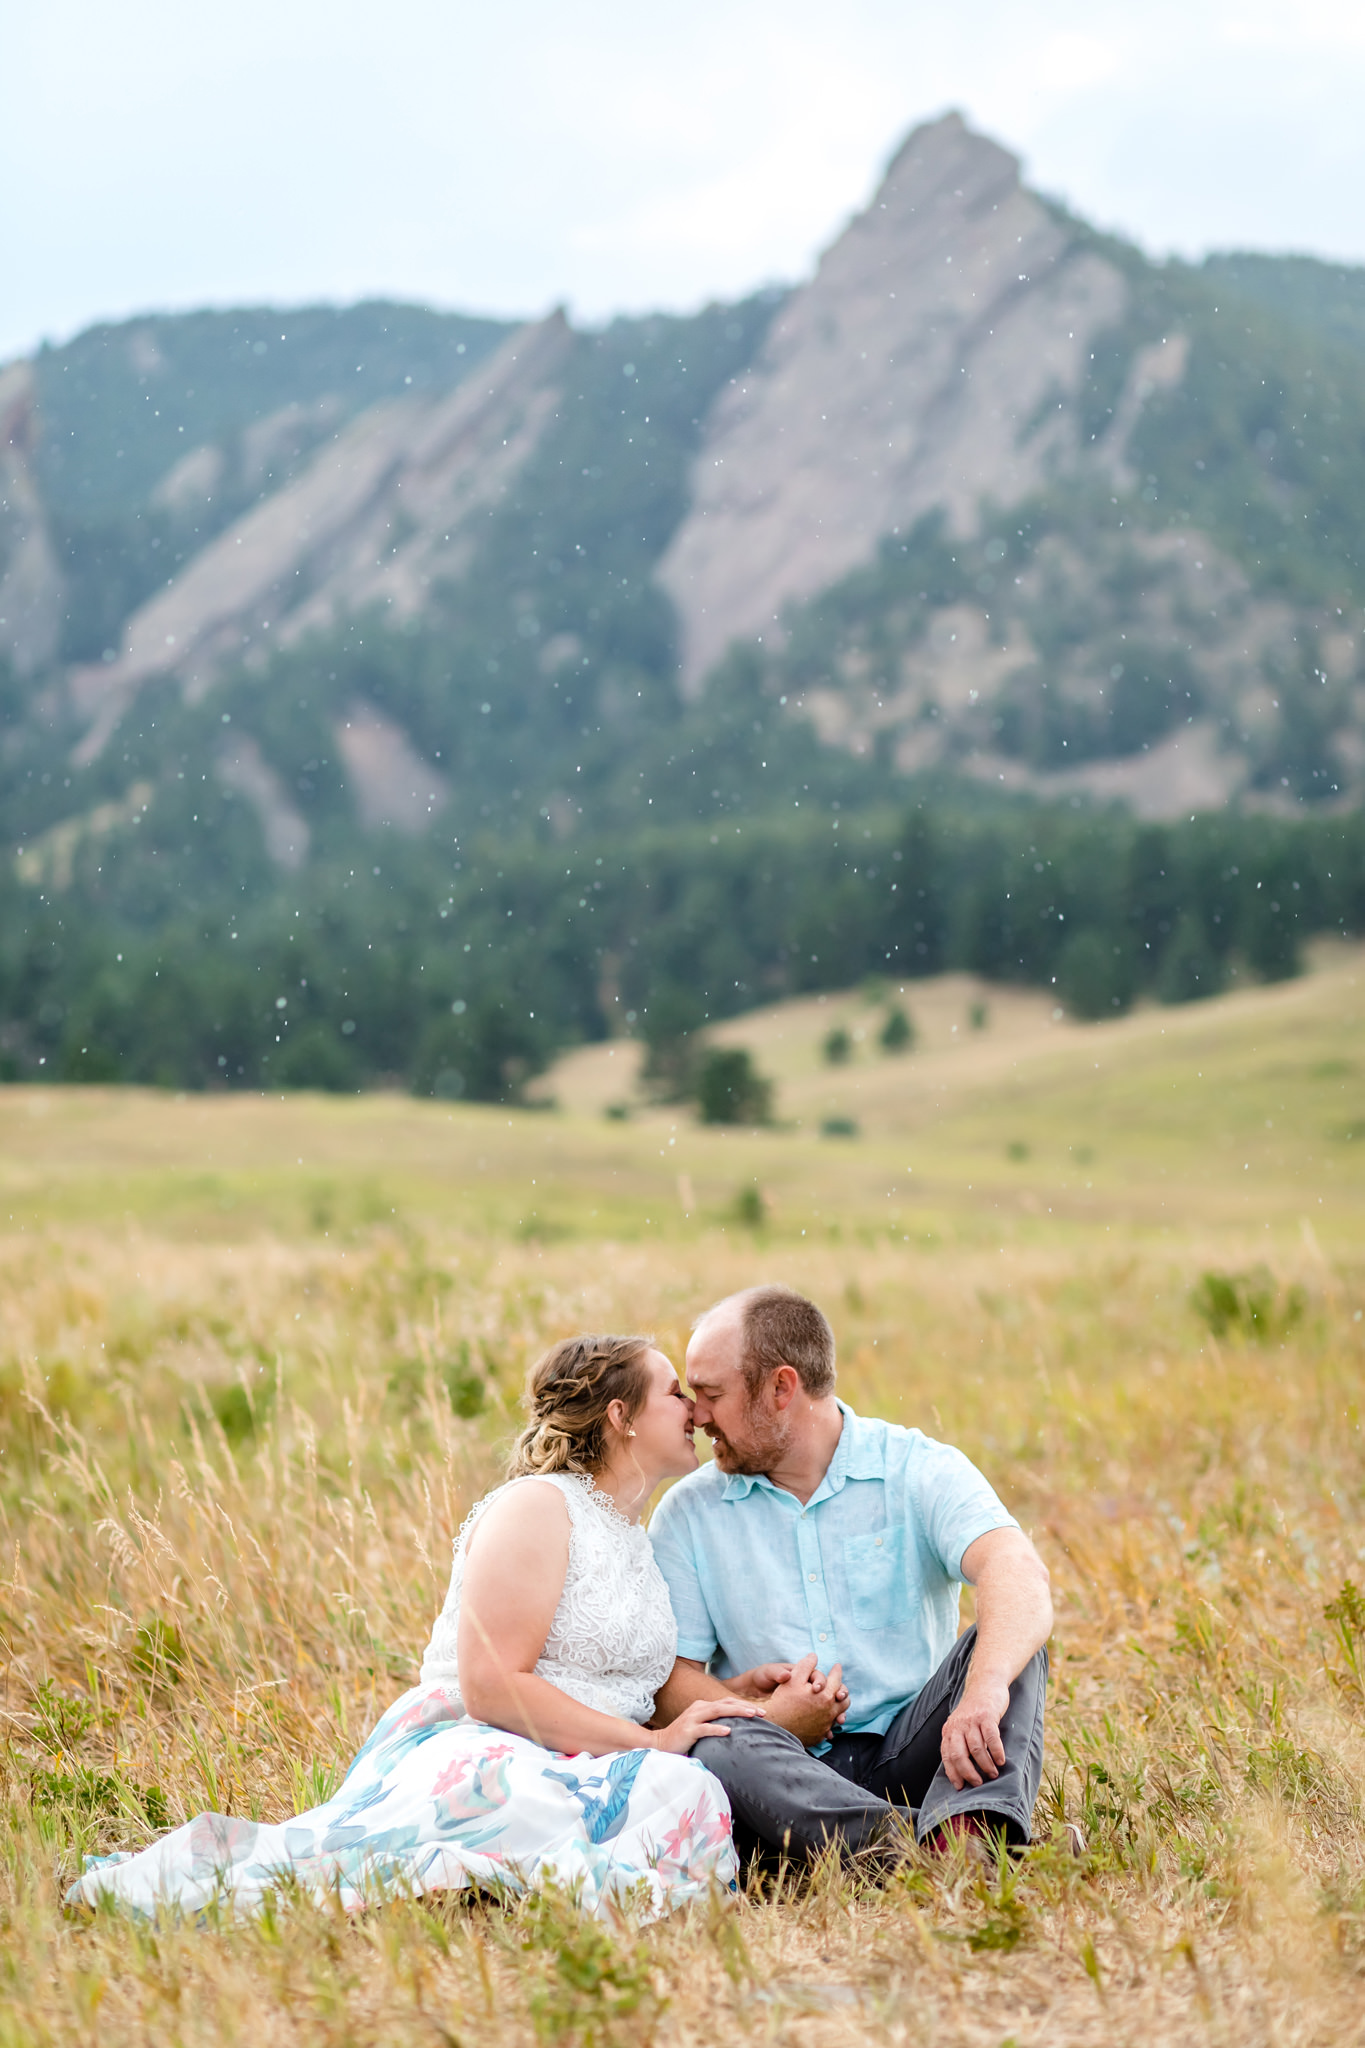 Lauren & Taylor kissing in a field at Chautauqua Park in front of the Colorado Flatirons. Mountain Fall Engagement Session by Colorado Engagement Photographer, Jennifer Garza. Colorado Fall Engagement, Colorado Fall Engagement Photos, Fall Engagement Photography, Fall Engagement Photos, Colorado Engagement Photographer, Colorado Engagement Photography, Mountain Engagement Photographer, Mountain Engagement, Mountain Engagement Photos, Rocky Mountain Bride, Wedding Inspo, Wedding Season, Colorado Wedding, Colorado Bride, Bride to Be, Couples Goals